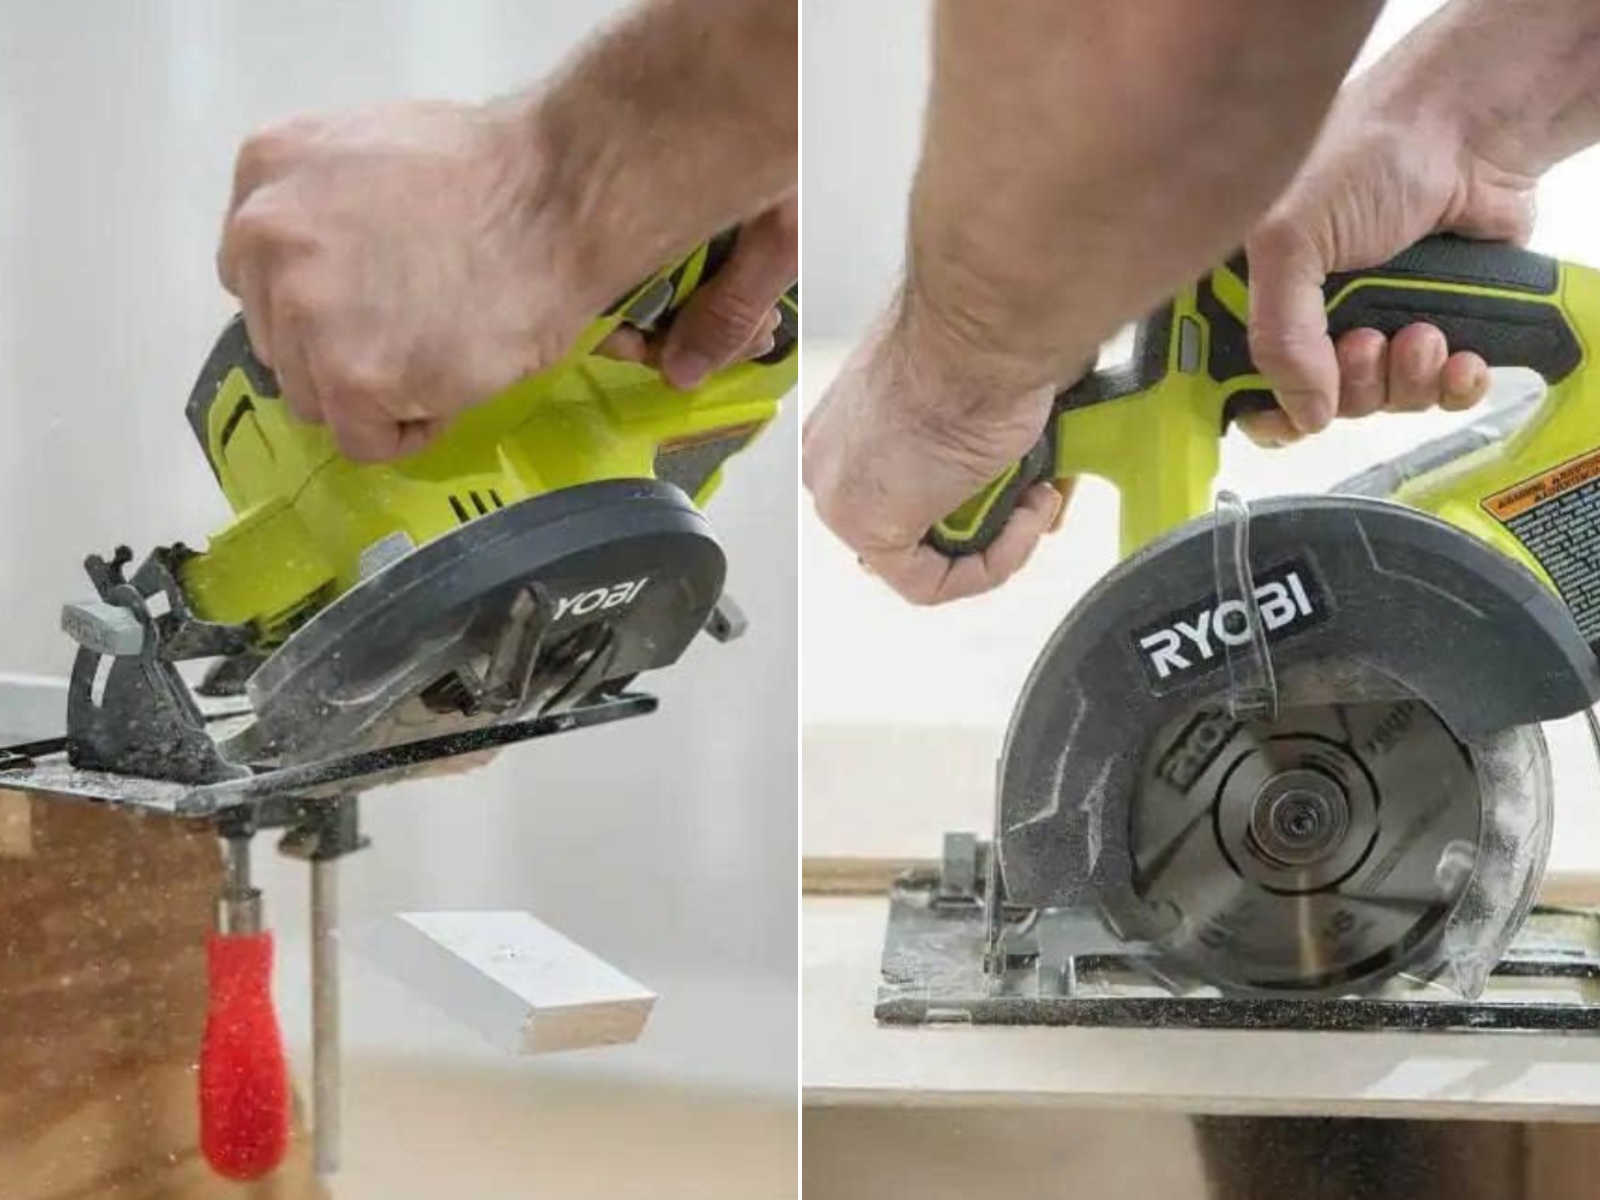 A Ryobi saw cutting an angle cut, and another saw making a plunge cut.